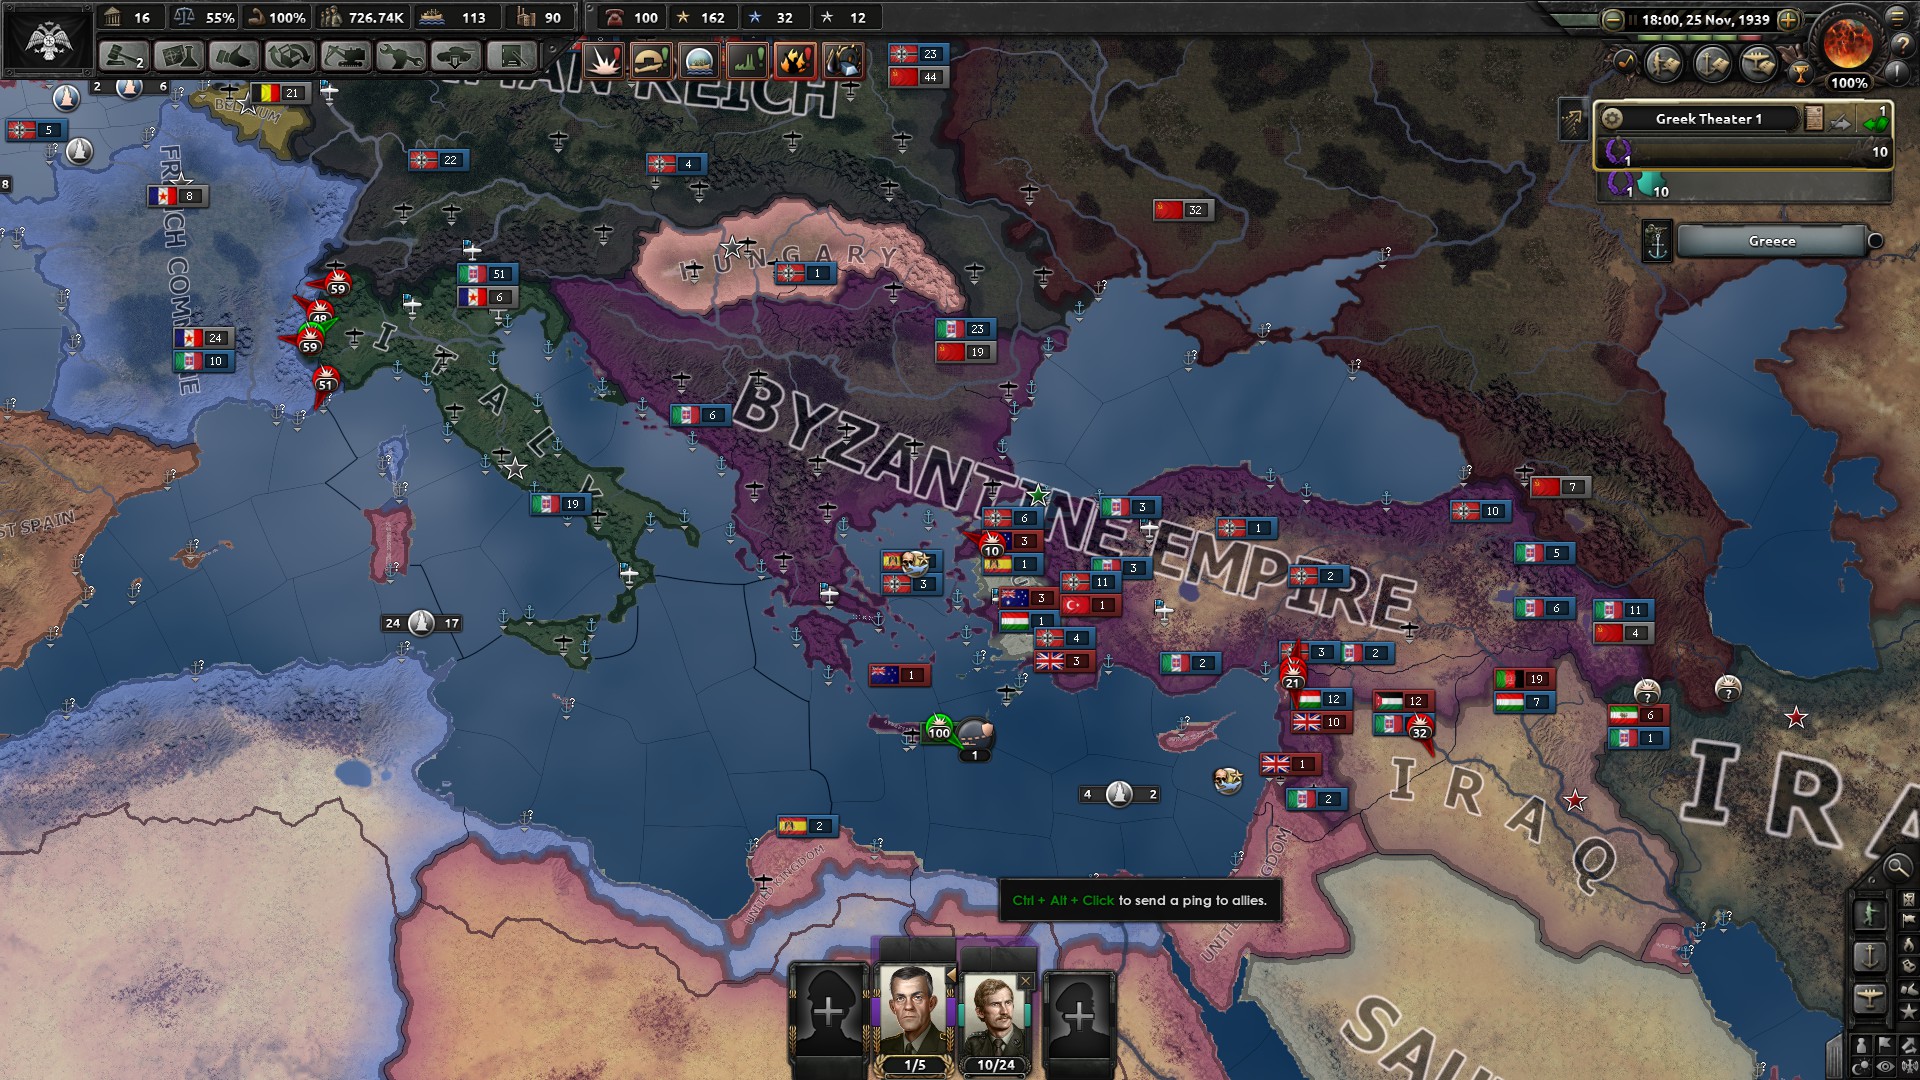 hoi4 italy guide